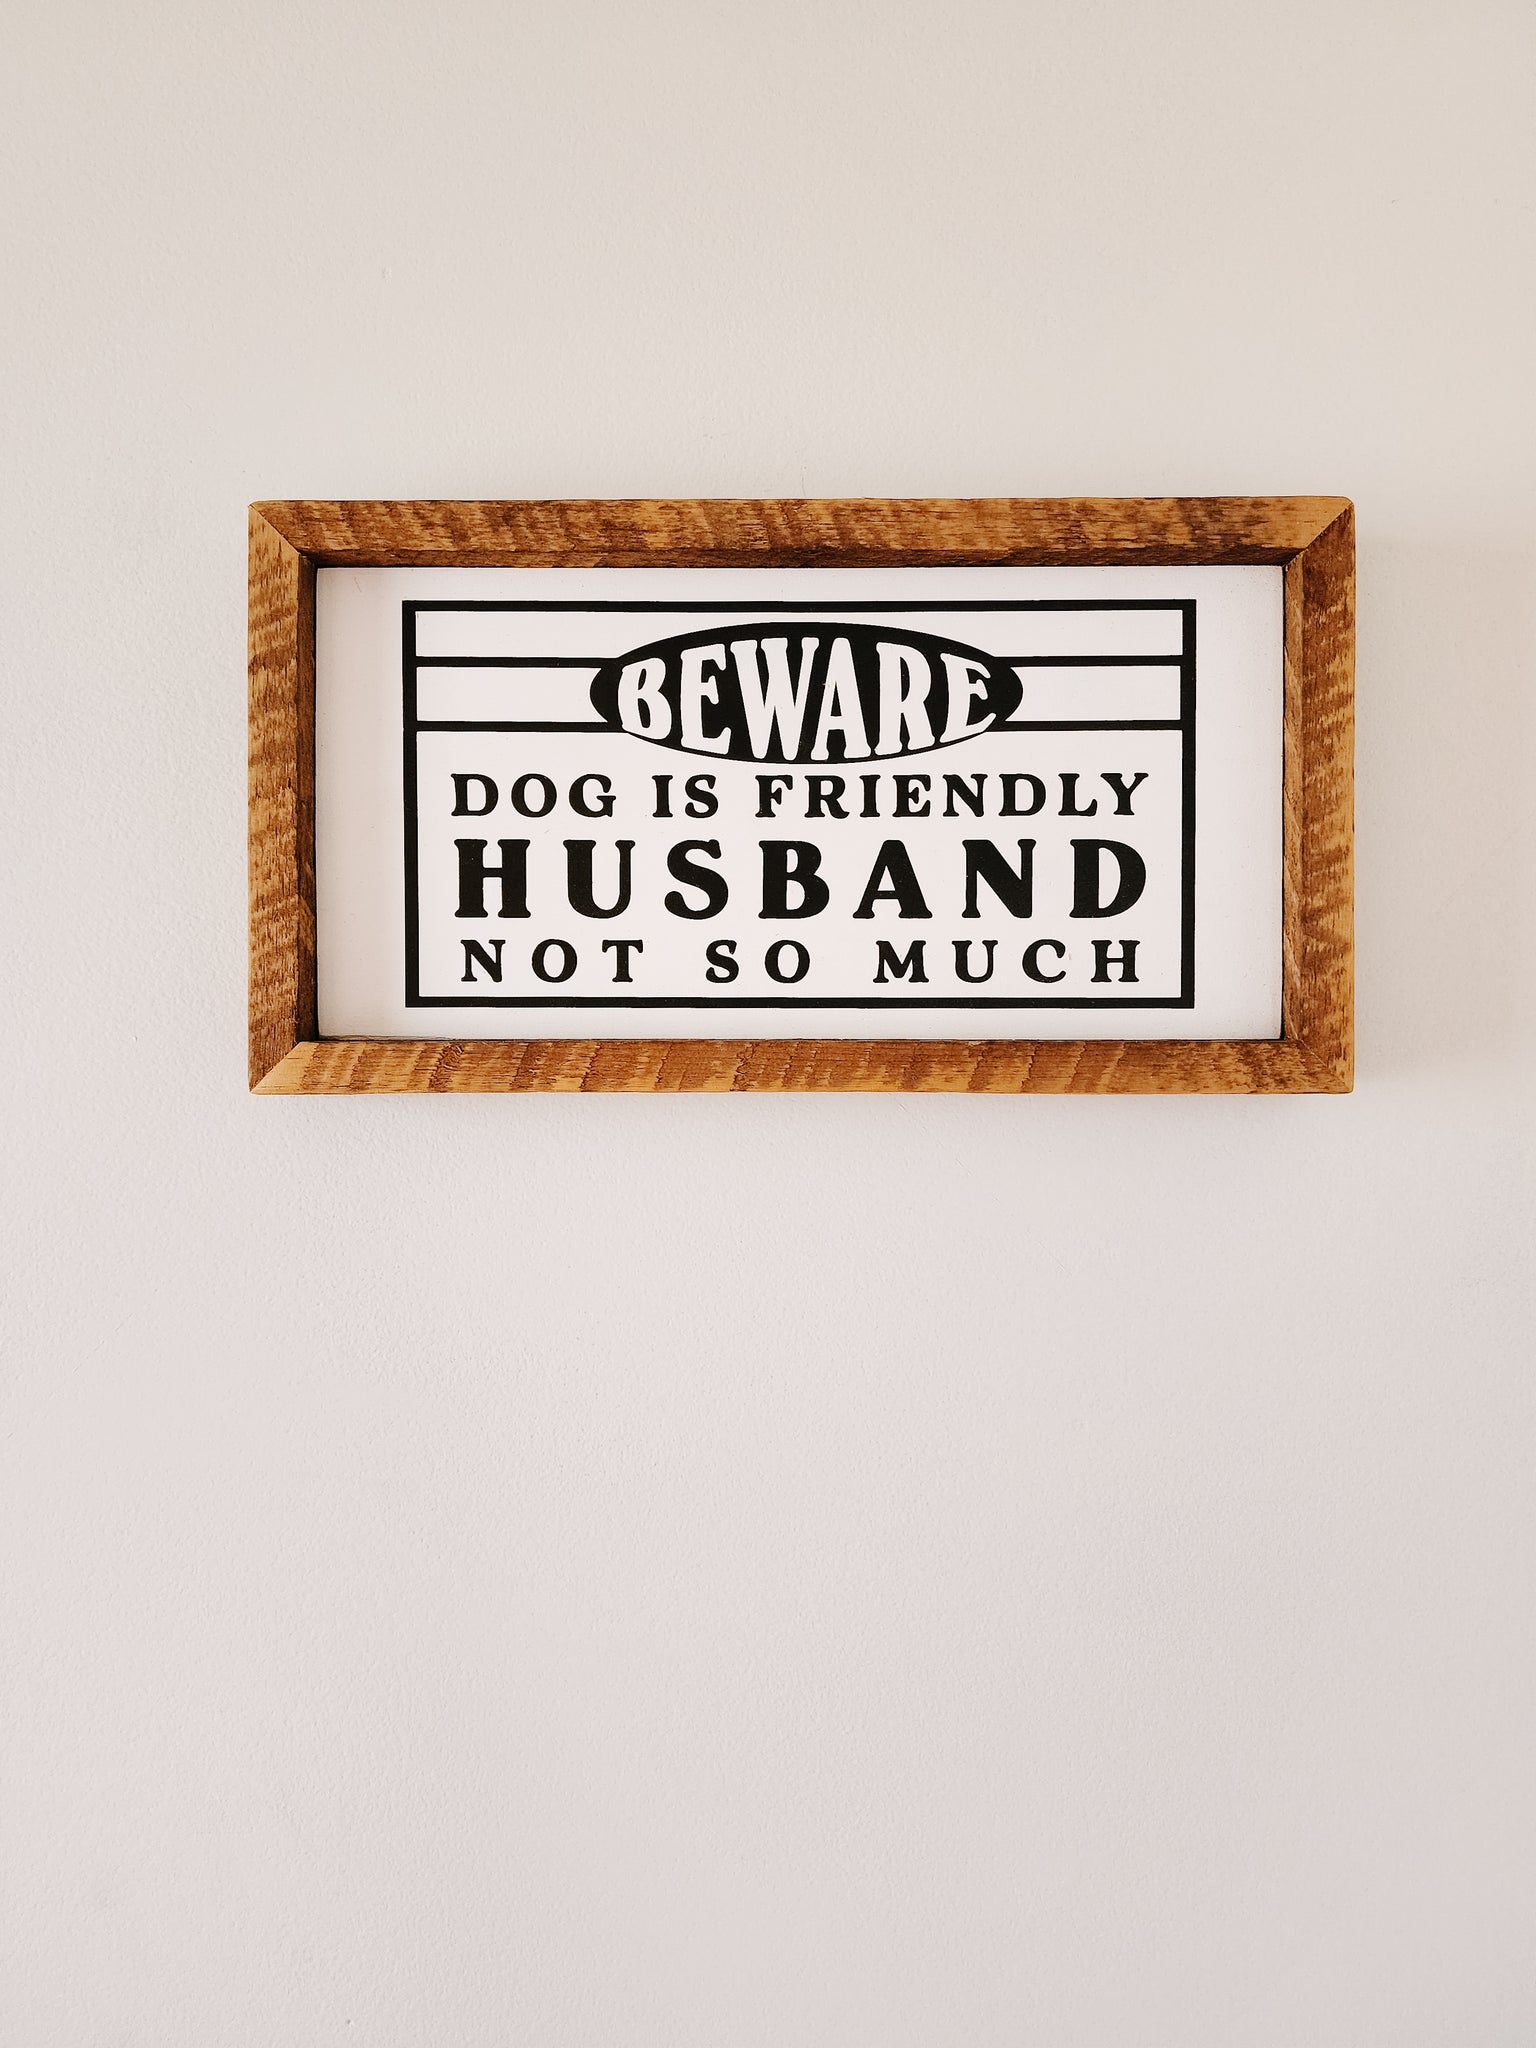 7x13 Beware dog is friendly Husband not so much sign